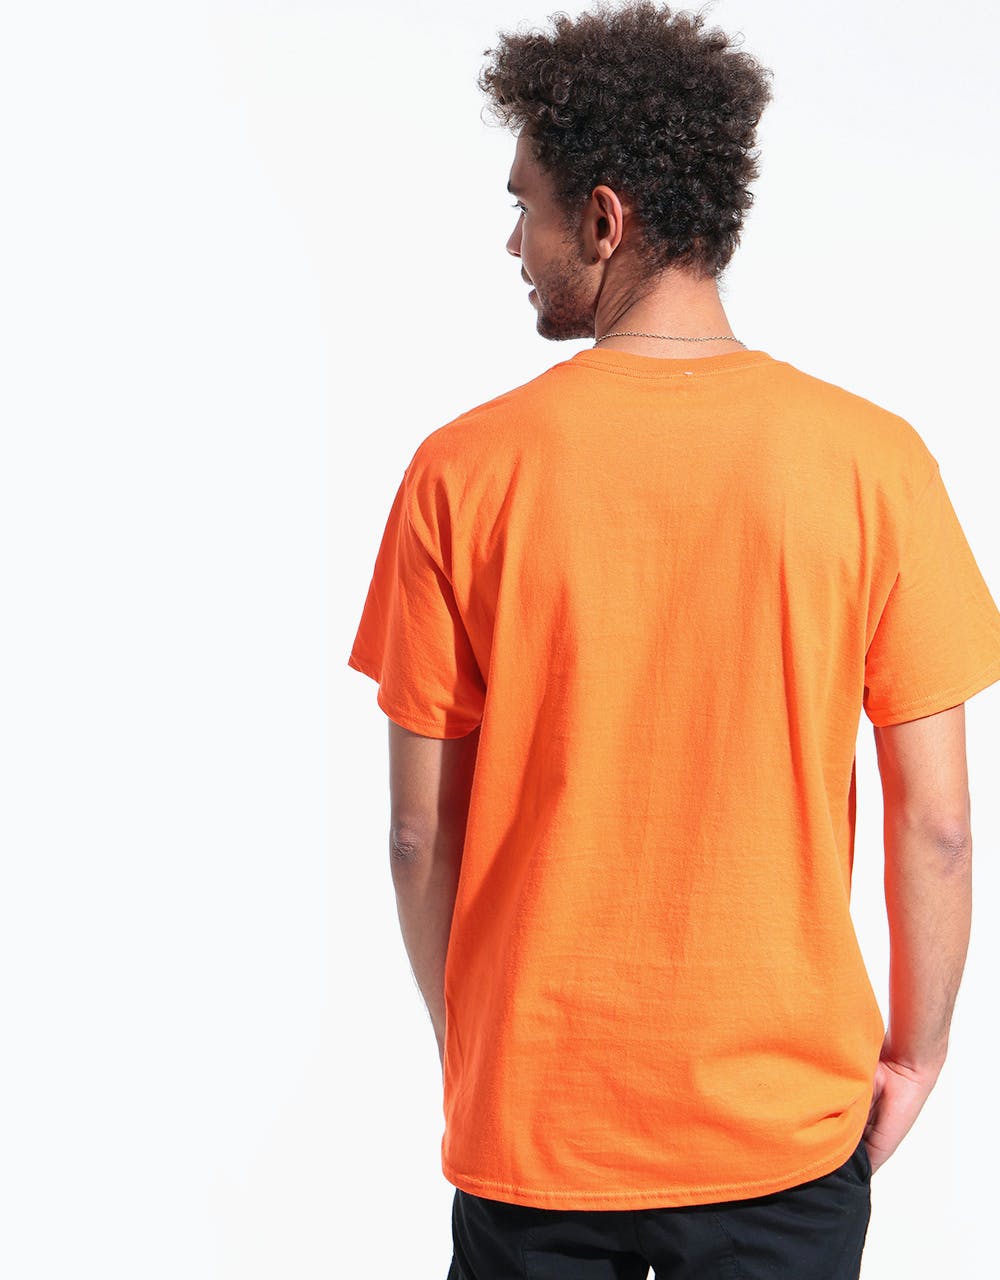 Route One Bees T-Shirt - Orange